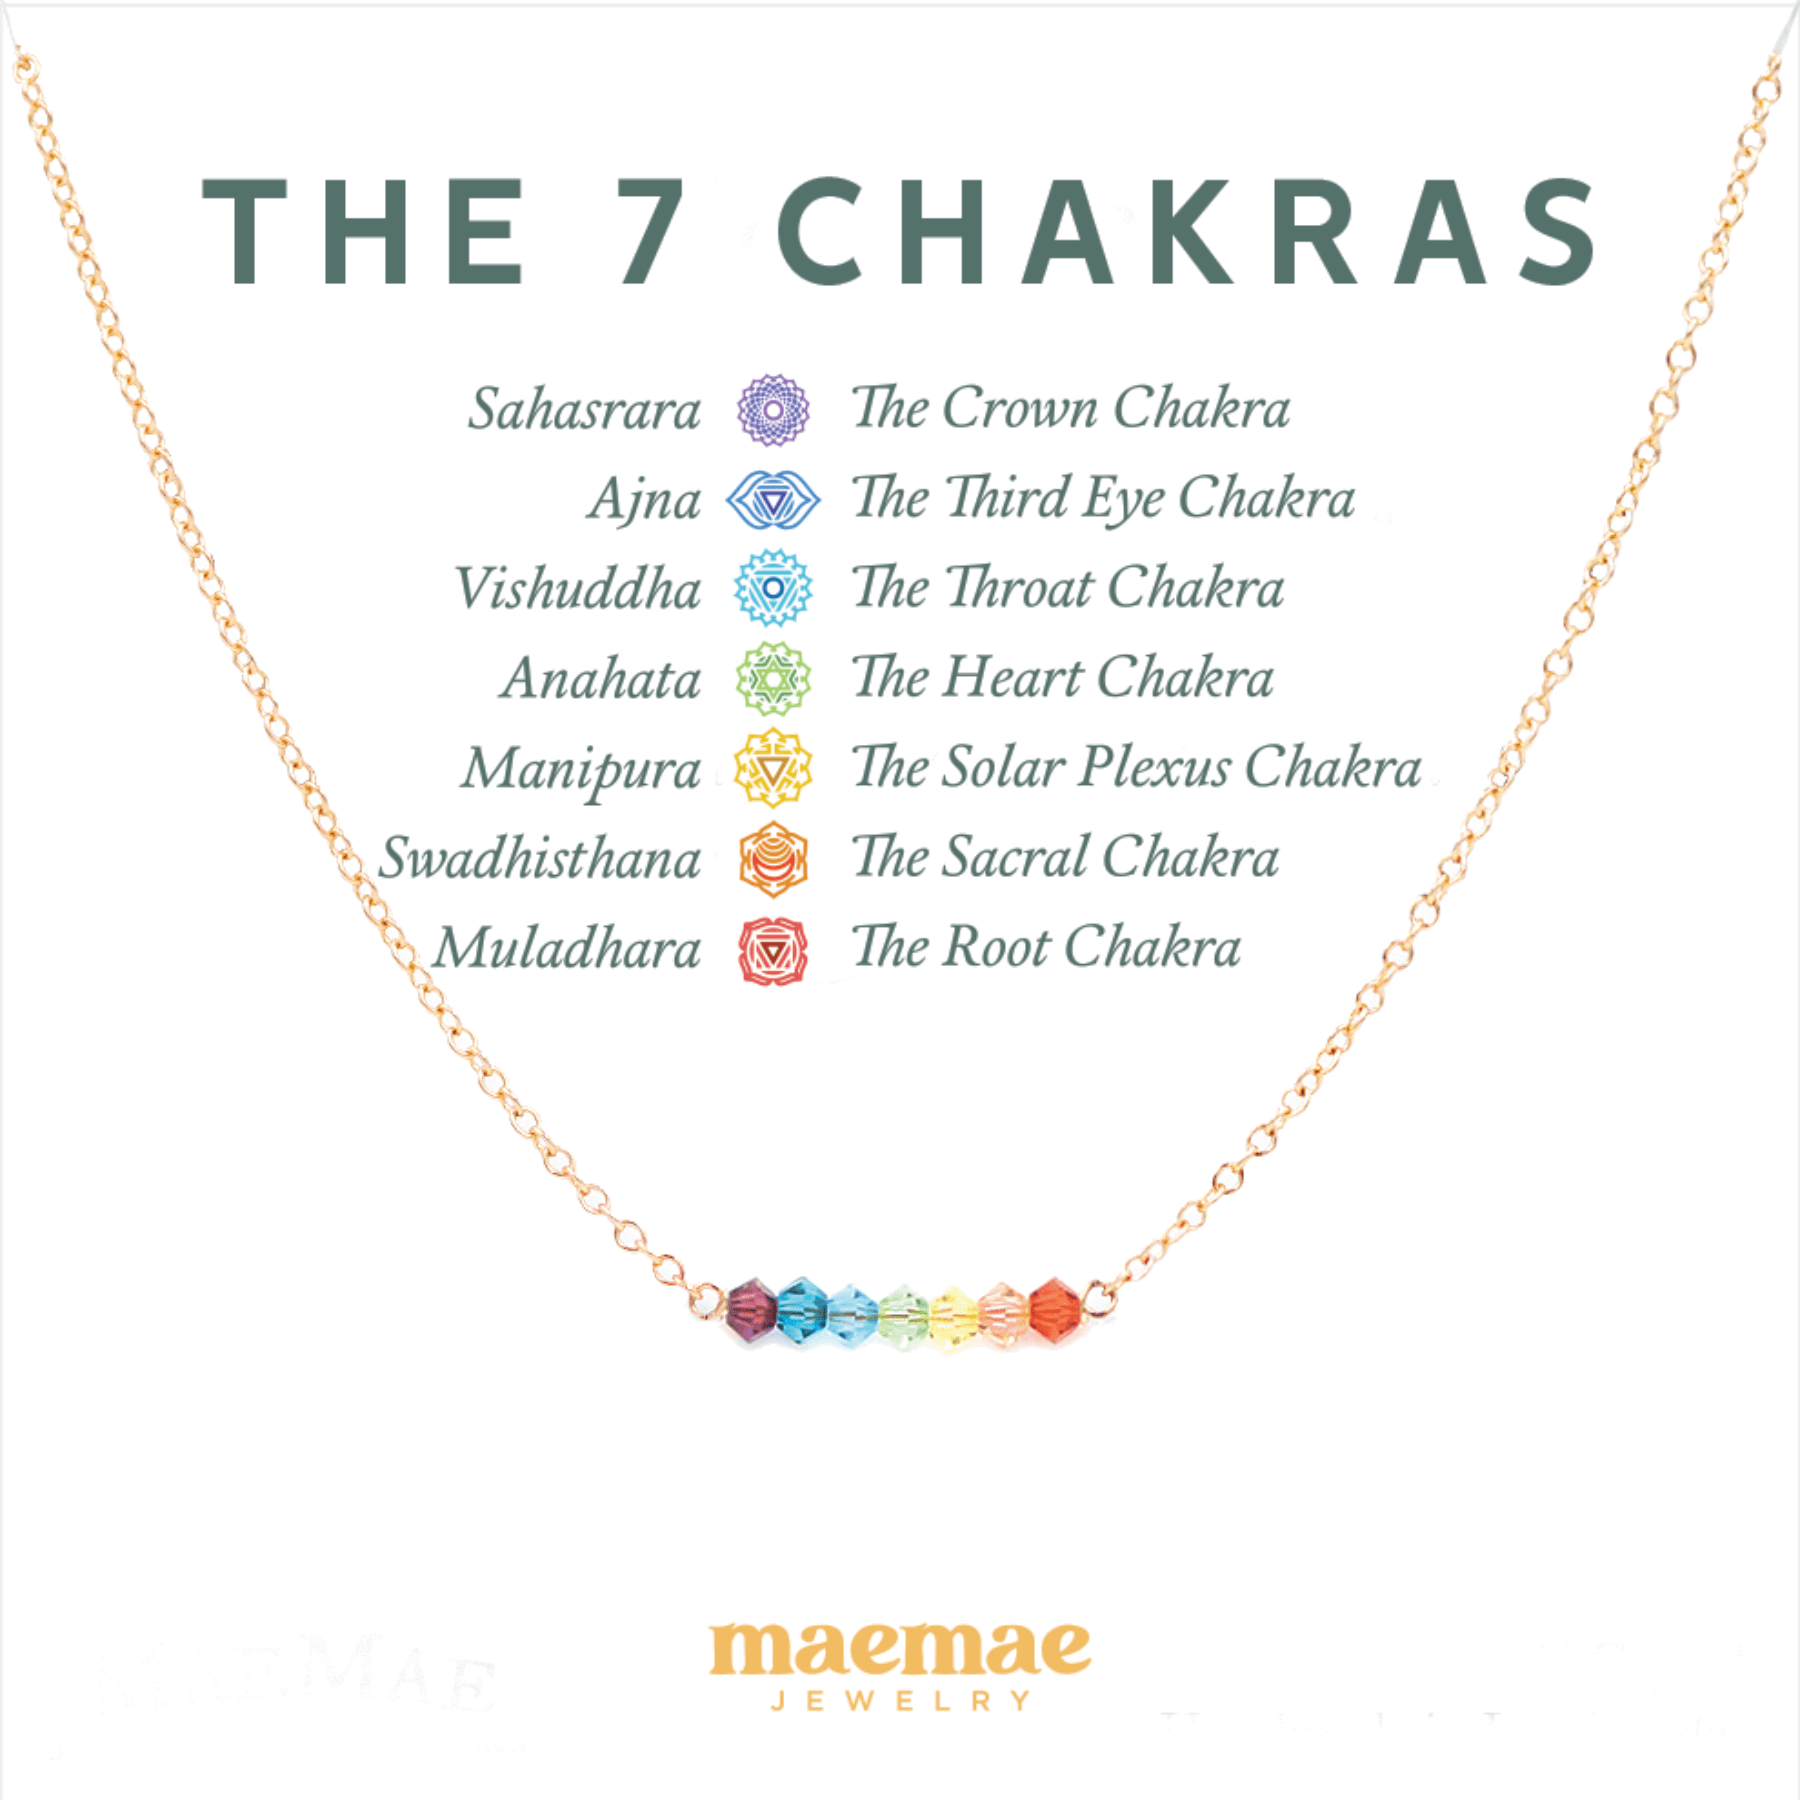 MaeMae Jewelry the 7 chakras rainbow charm necklace gold chain on card